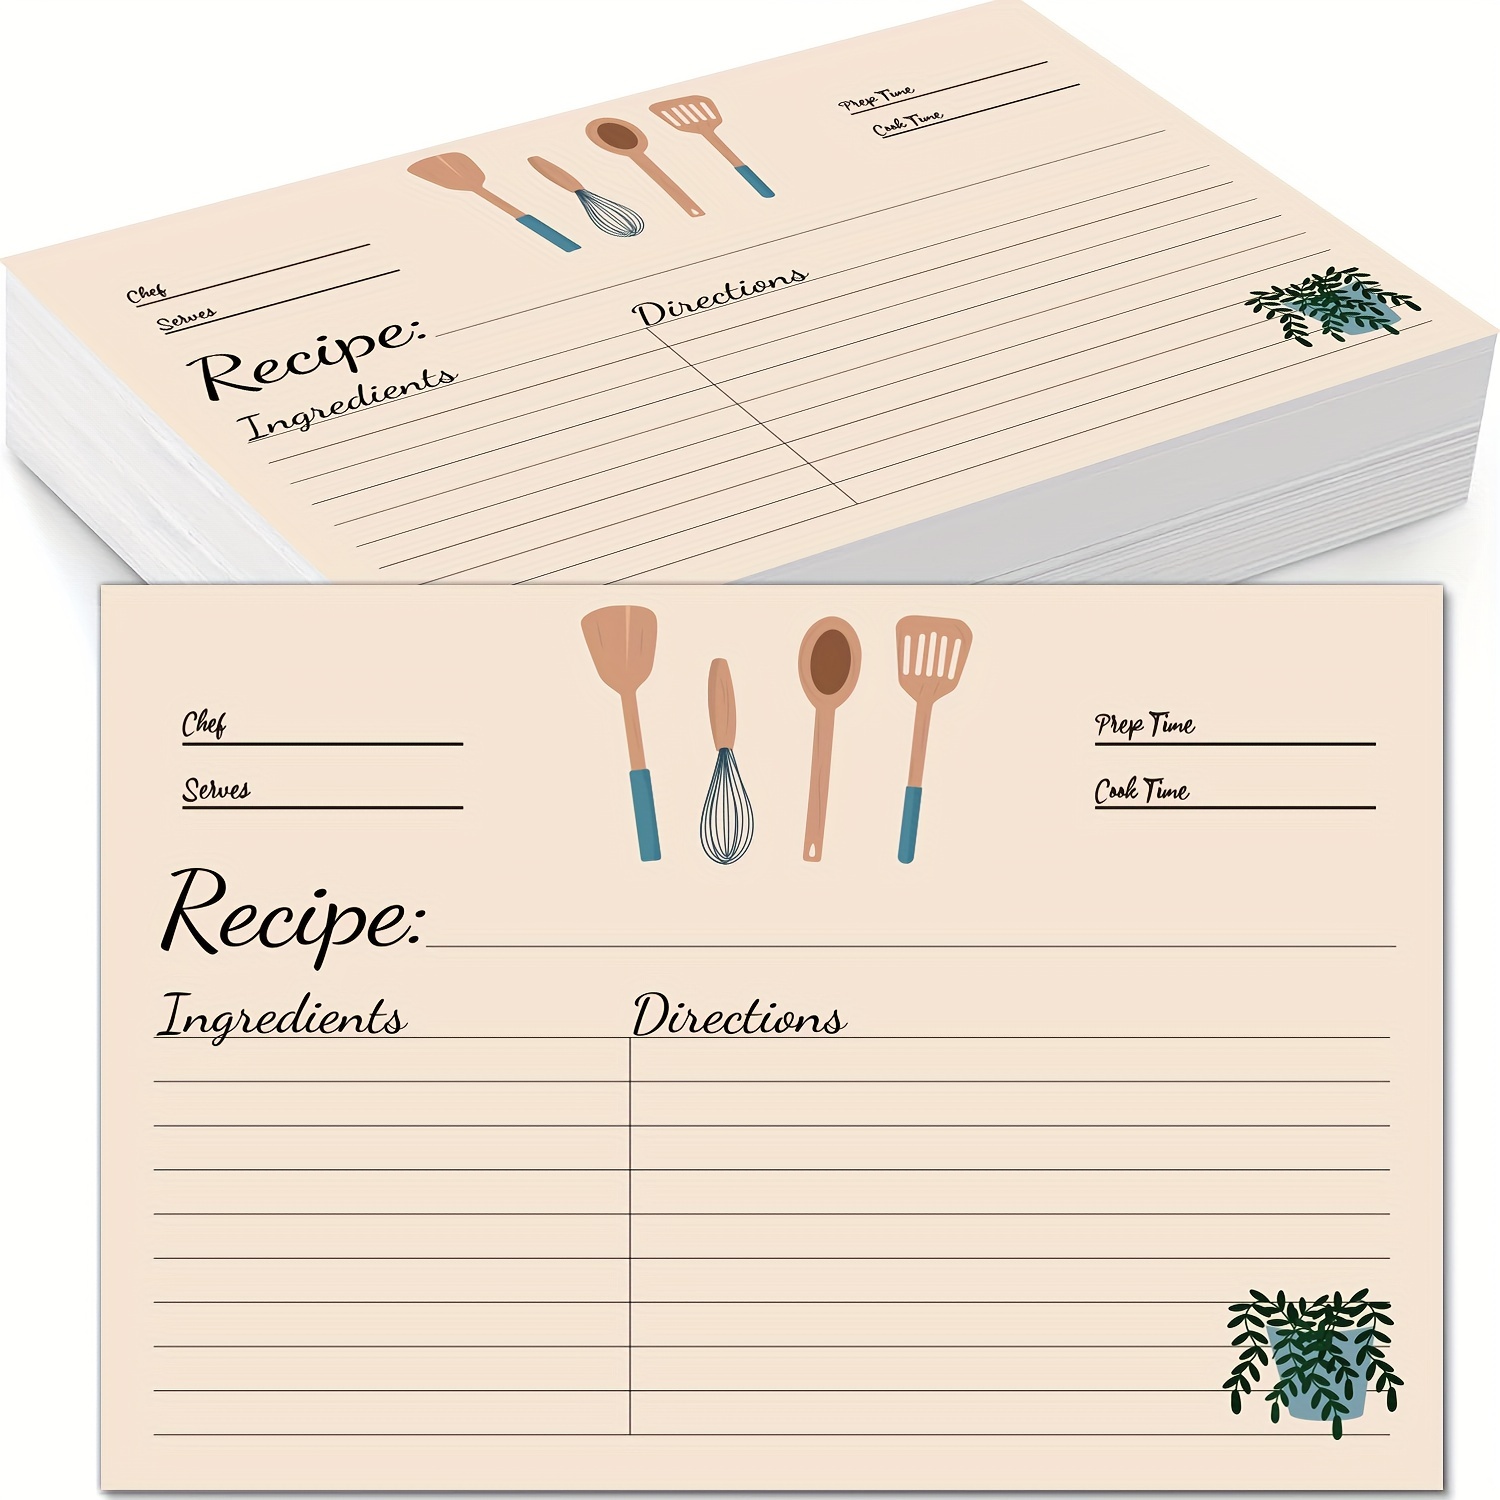 Recipes Notebook: Personal Cookbook To Write In Perfect For Girl Design With  Cooking Delicious Food Sketch On The Squared Background (Paperback)